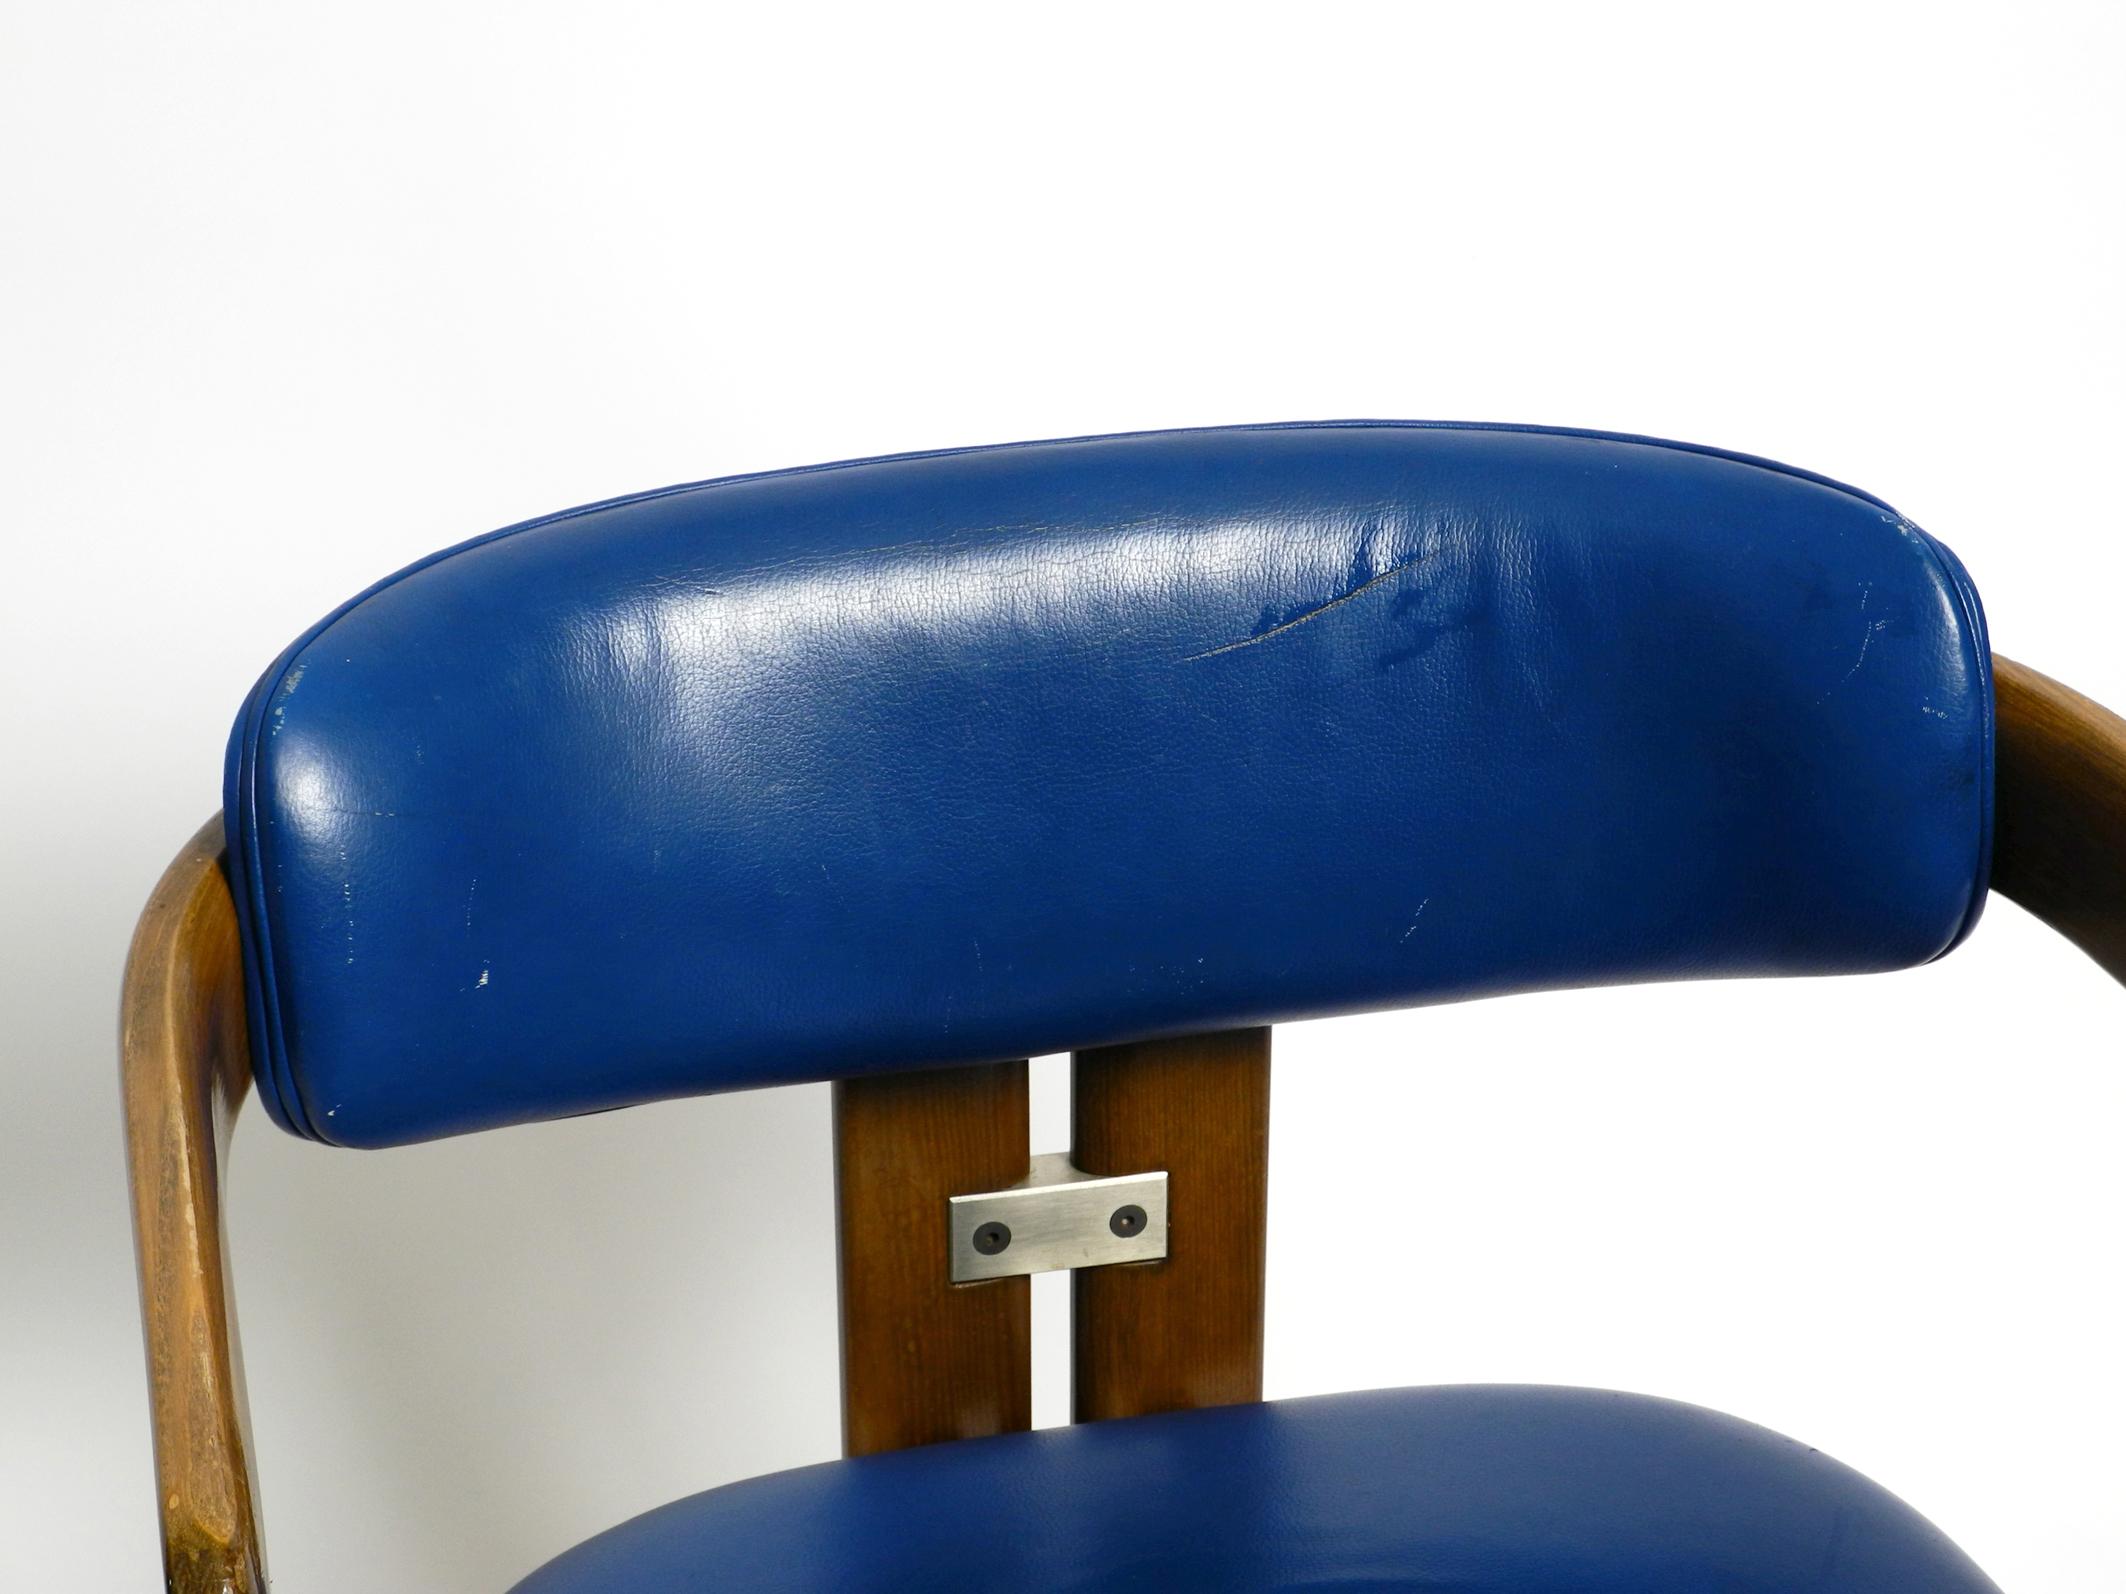 Beech Pamplona Chair by Augusto Savini for Pozzi in Blue Leather Upholstery